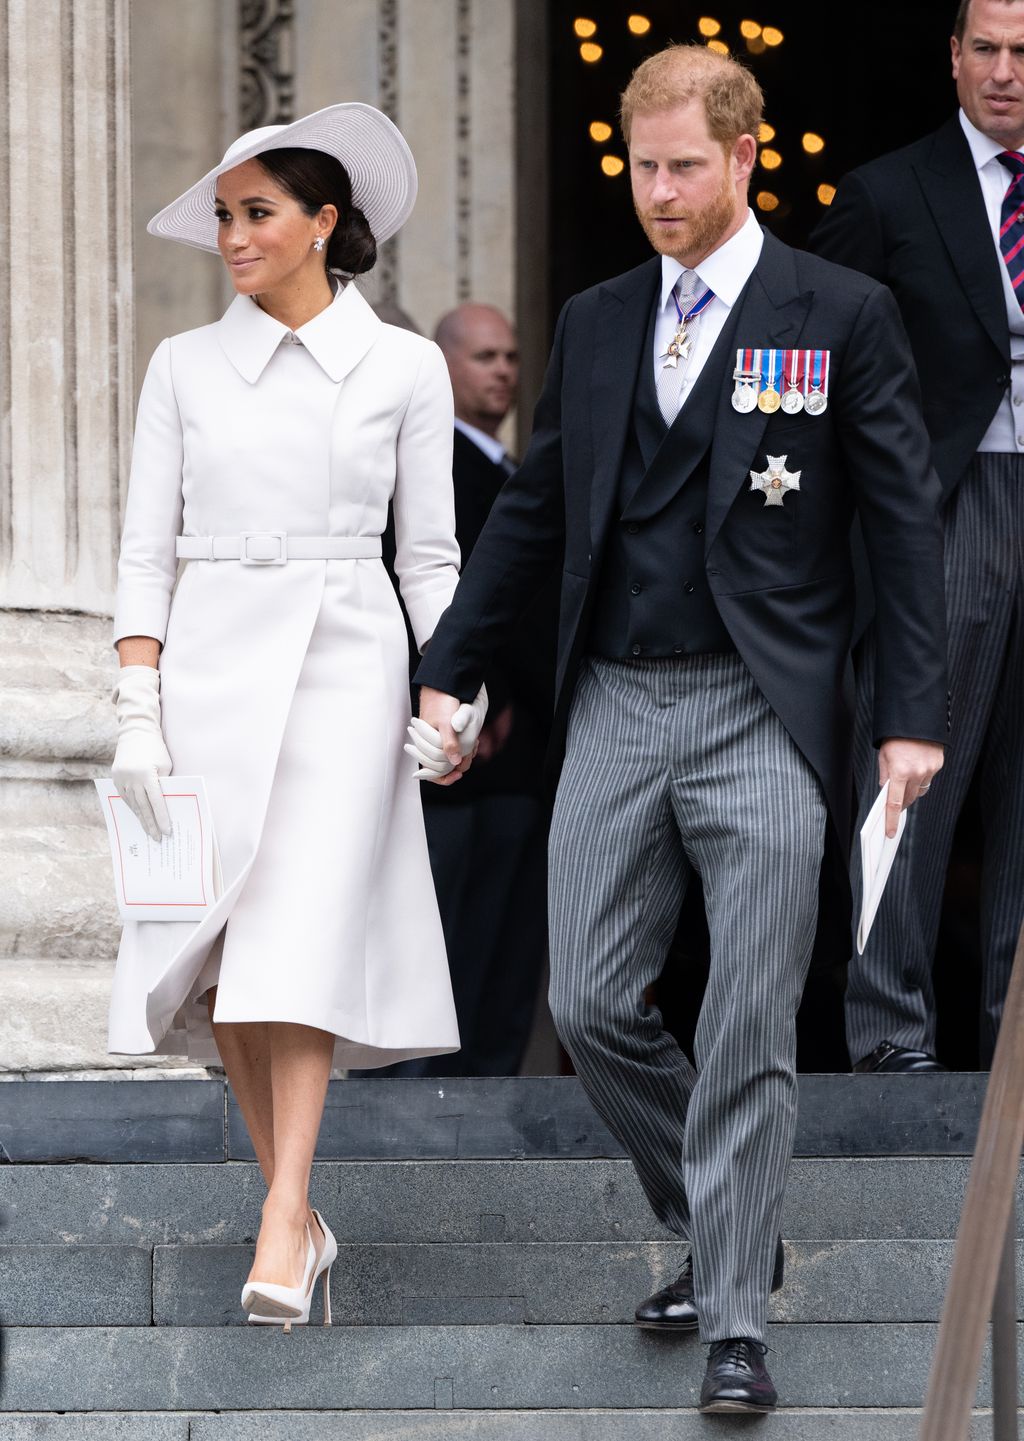 LONDON, ENGLAND - JUNE 03: Meghan, Duchess of Sussex and Prince Harry, Duke of Sussex attend the National Service of Thanksgiving at St Paul's Cathedral on June 03, 2022 in London, England. The Platinum Jubilee of Elizabeth II is being celebrated from June 2 to June 5, 2022, in the UK and Commonwealth to mark the 70th anniversary of the accession of Queen Elizabeth II on 6 February 1952.  on June 03, 2022 in London, England. The Platinum Jubilee of Elizabeth II is being celebrated from June 2 to June 5, 2022, in the UK and Commonwealth to mark the 70th anniversary of the accession of Queen Elizabeth II on 6 February 1952. (Photo by Samir Hussein/WireImage,)